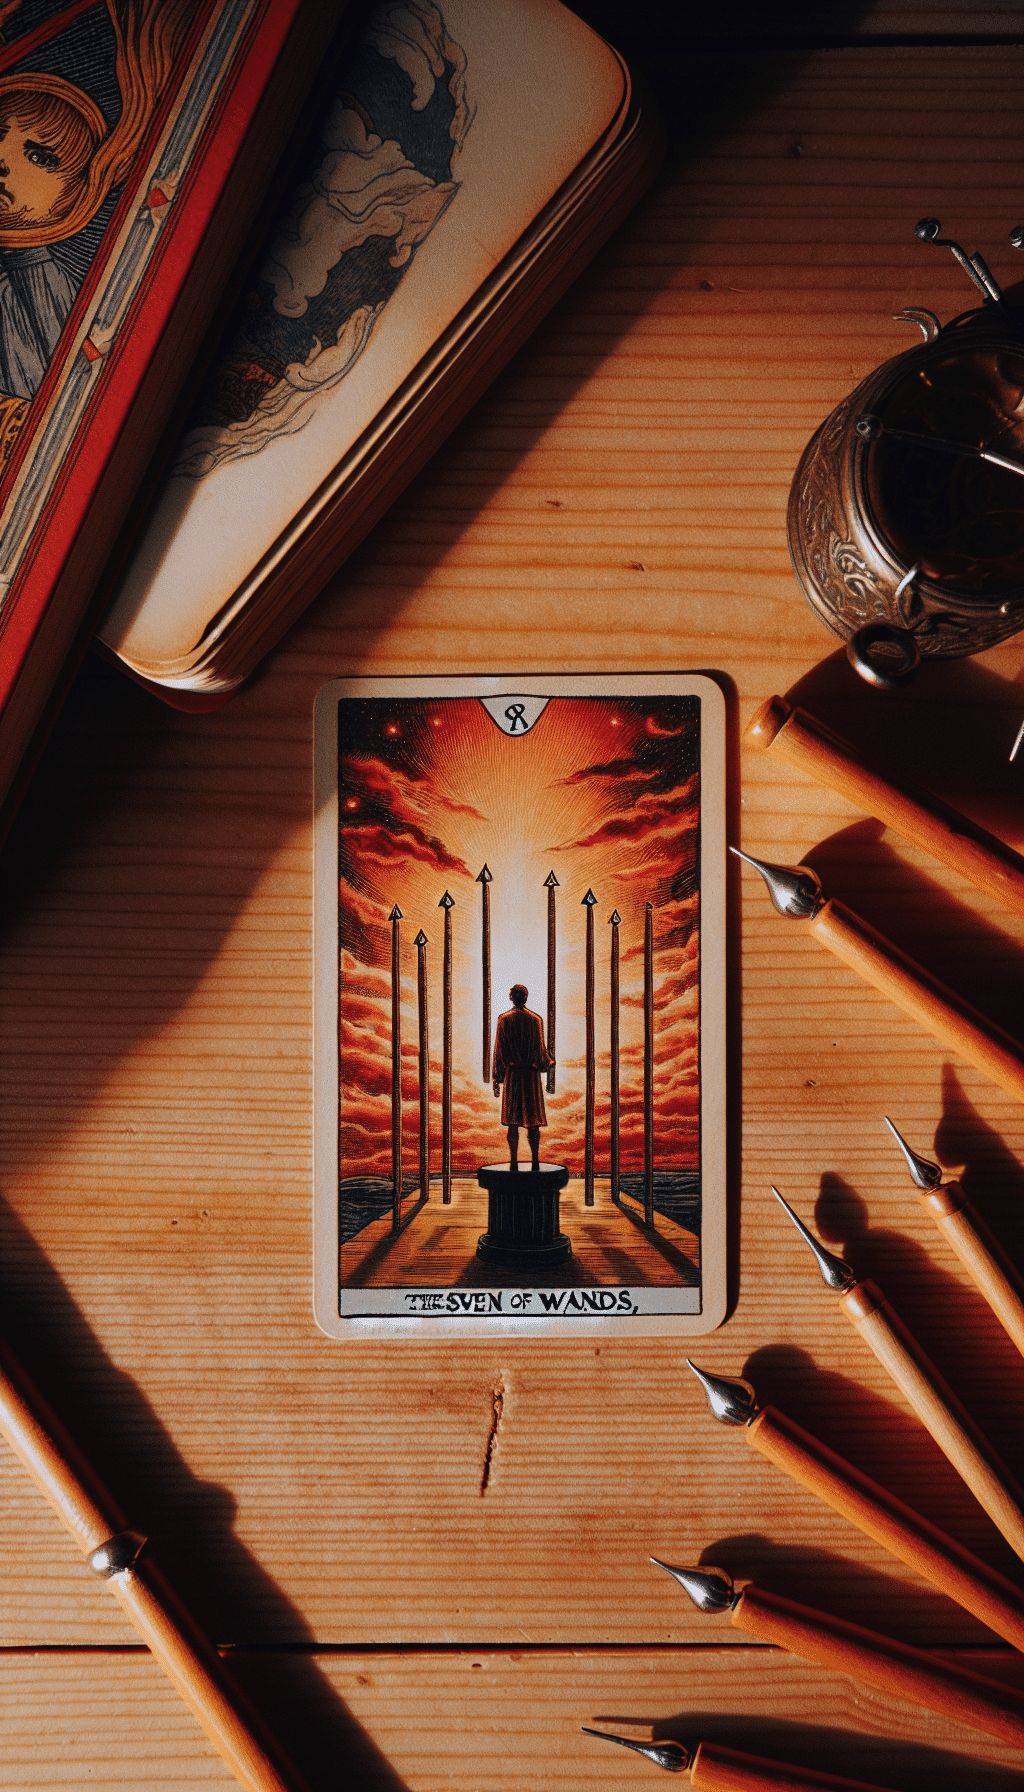 Conquering Adversity: The Seven of Wands in Present Challenges